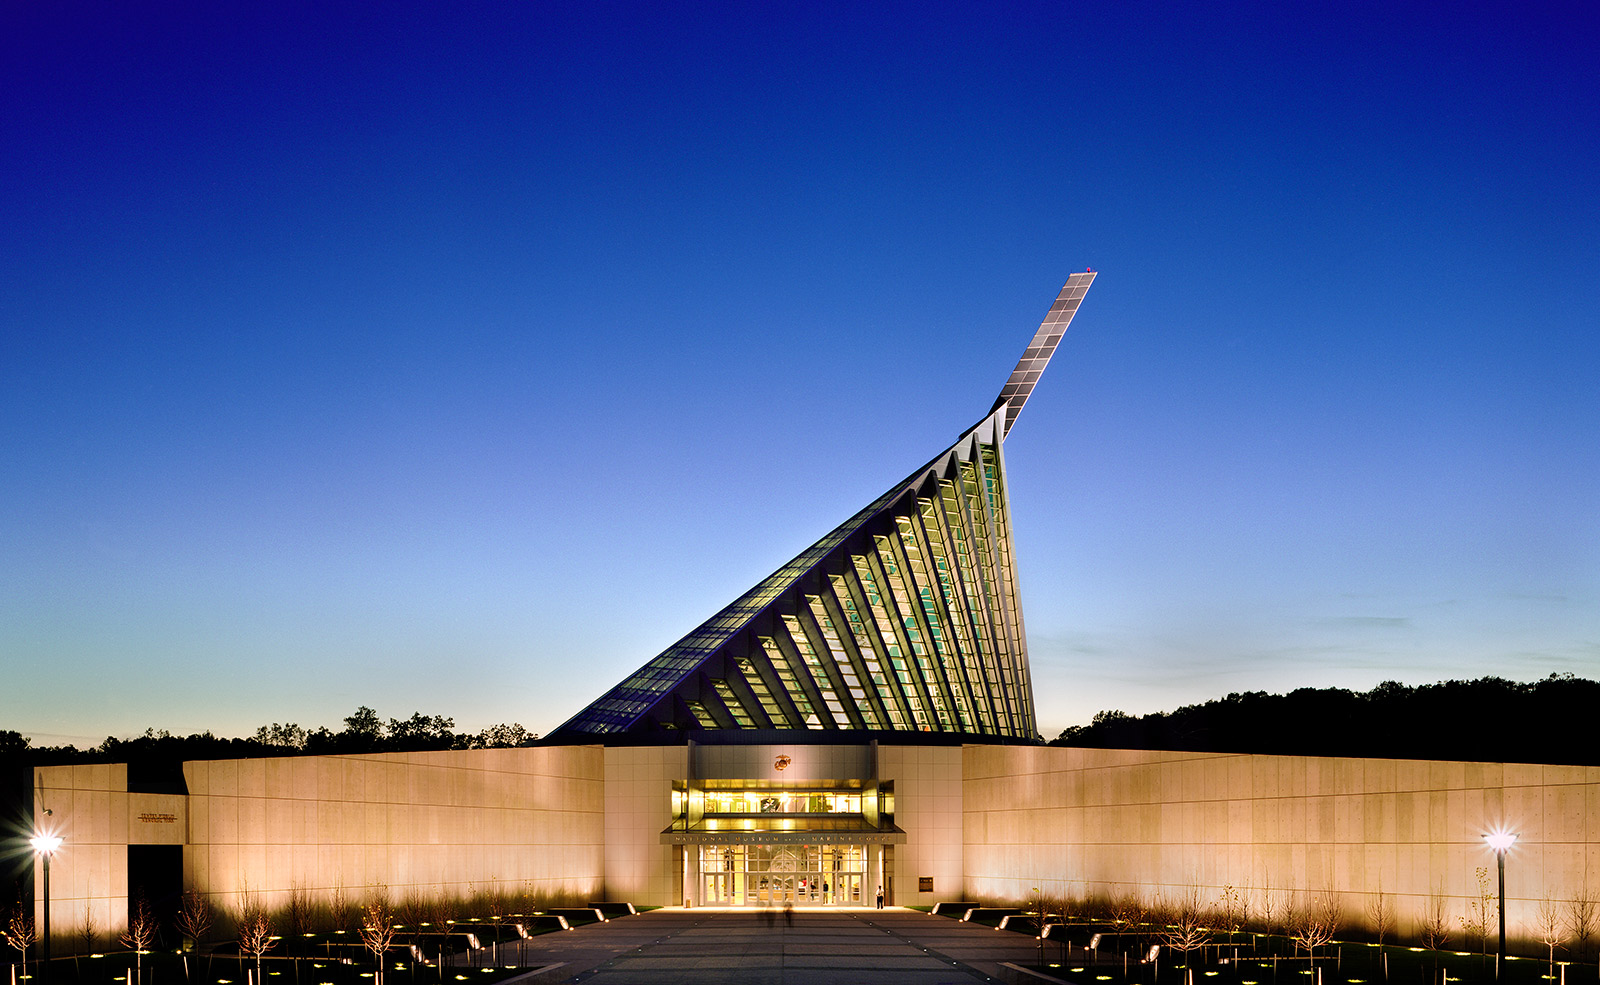 The National Museum of the Marine Corps’ Innovative Design Featured in ‘The Military Engineer’